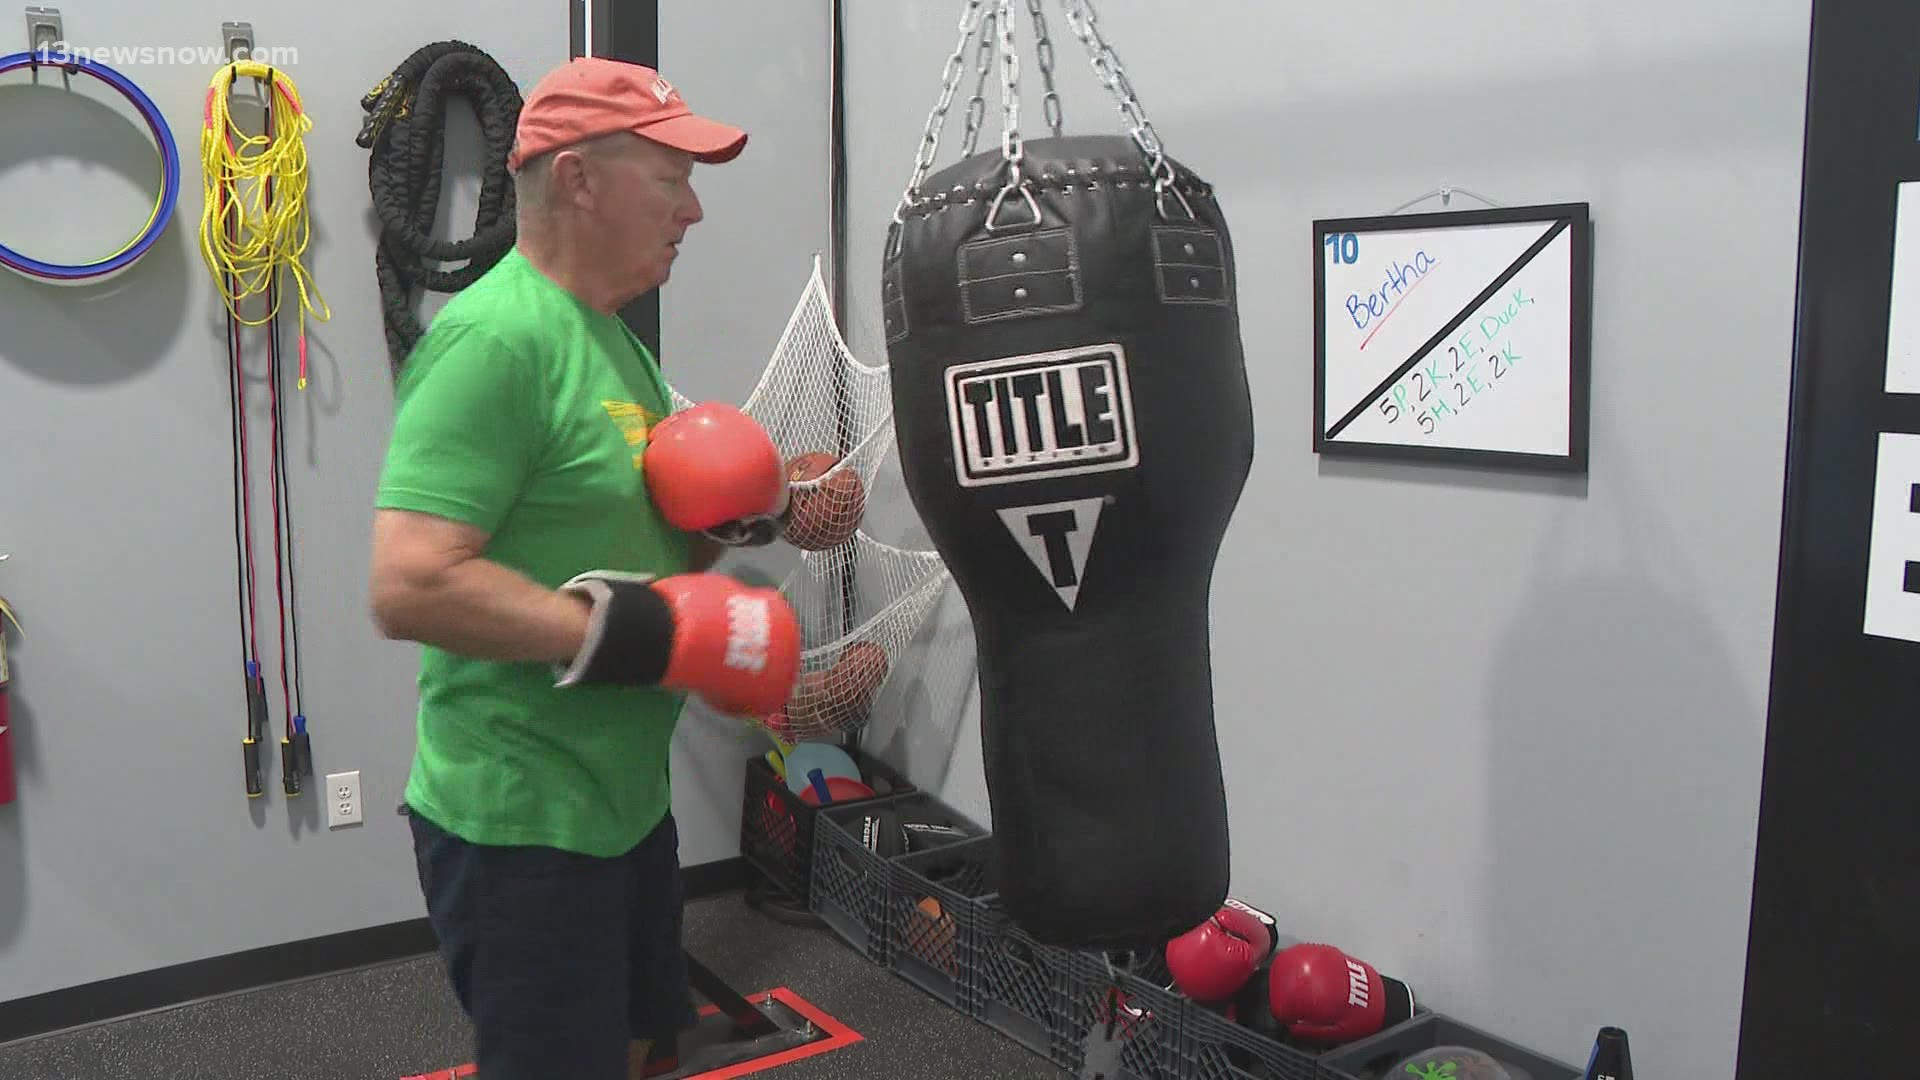 The research shows that boxing is effective at limiting the progression of this neurological disorder.